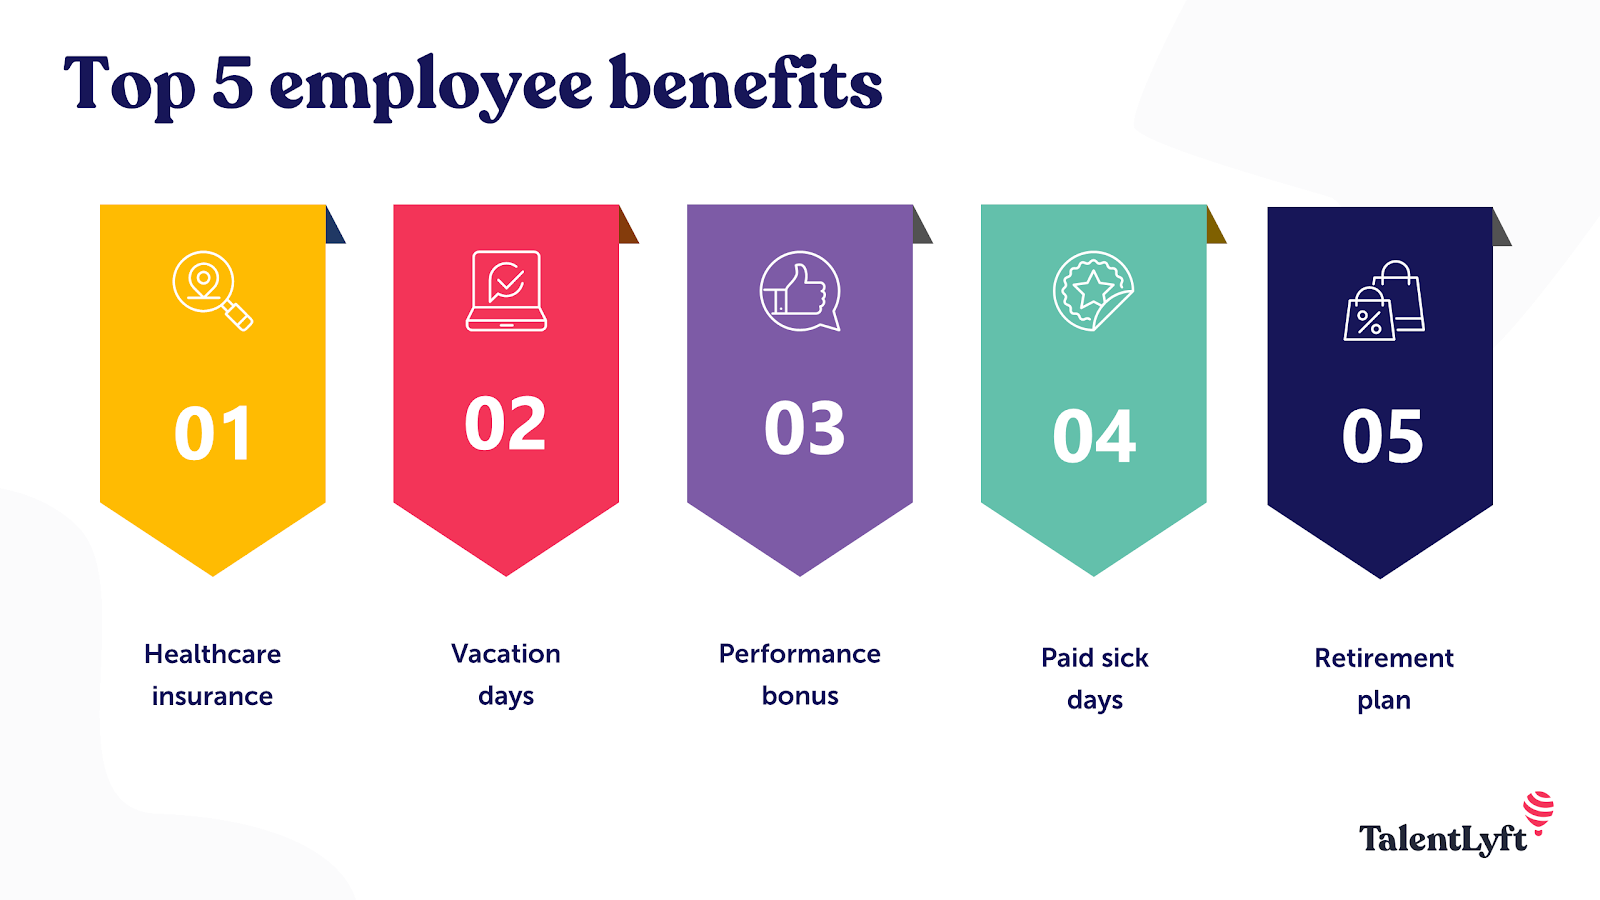 Top 5 employee benefits to attract and retain employees